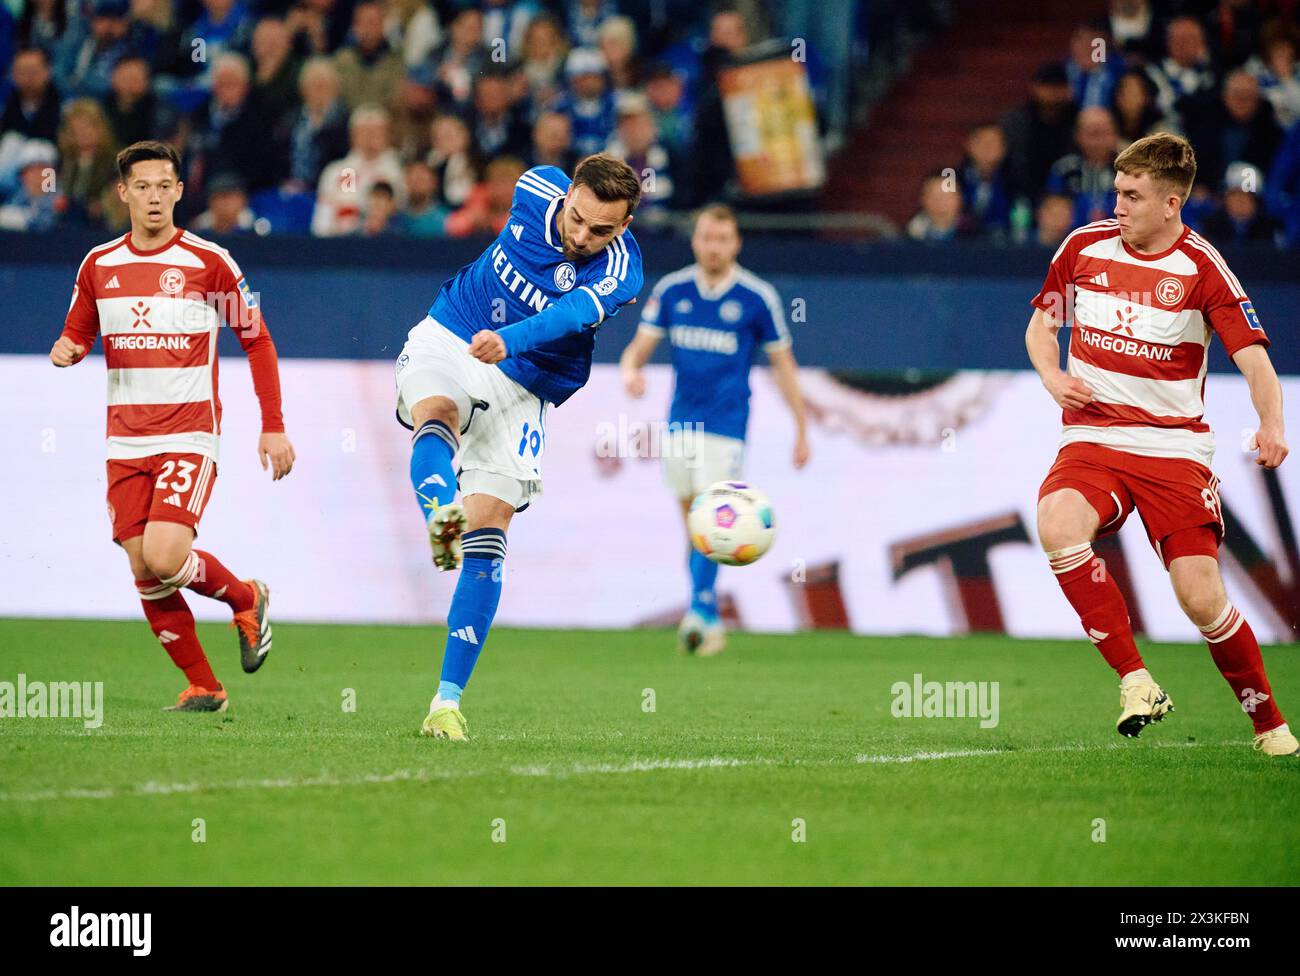 27 April 2024, North Rhine-Westphalia, Gelsenkirchen: Soccer: Bundesliga 2, FC Schalke 04 - Fortuna Düsseldorf, matchday 31 at the Veltins Arena. Schalke's Kenan Karaman (center) scores his goal to make it 1-0. Shinta Appelkamp on the left, Isak Johannesson of Düsseldorf on the right Photo: Bernd Thissen/dpa - IMPORTANT NOTE: In accordance with the regulations of the DFL German Football League and the DFB German Football Association, it is prohibited to utilize or have utilized photographs taken in the stadium and/or of the match in the form of sequential images and/or video-like photo series. Stock Photo